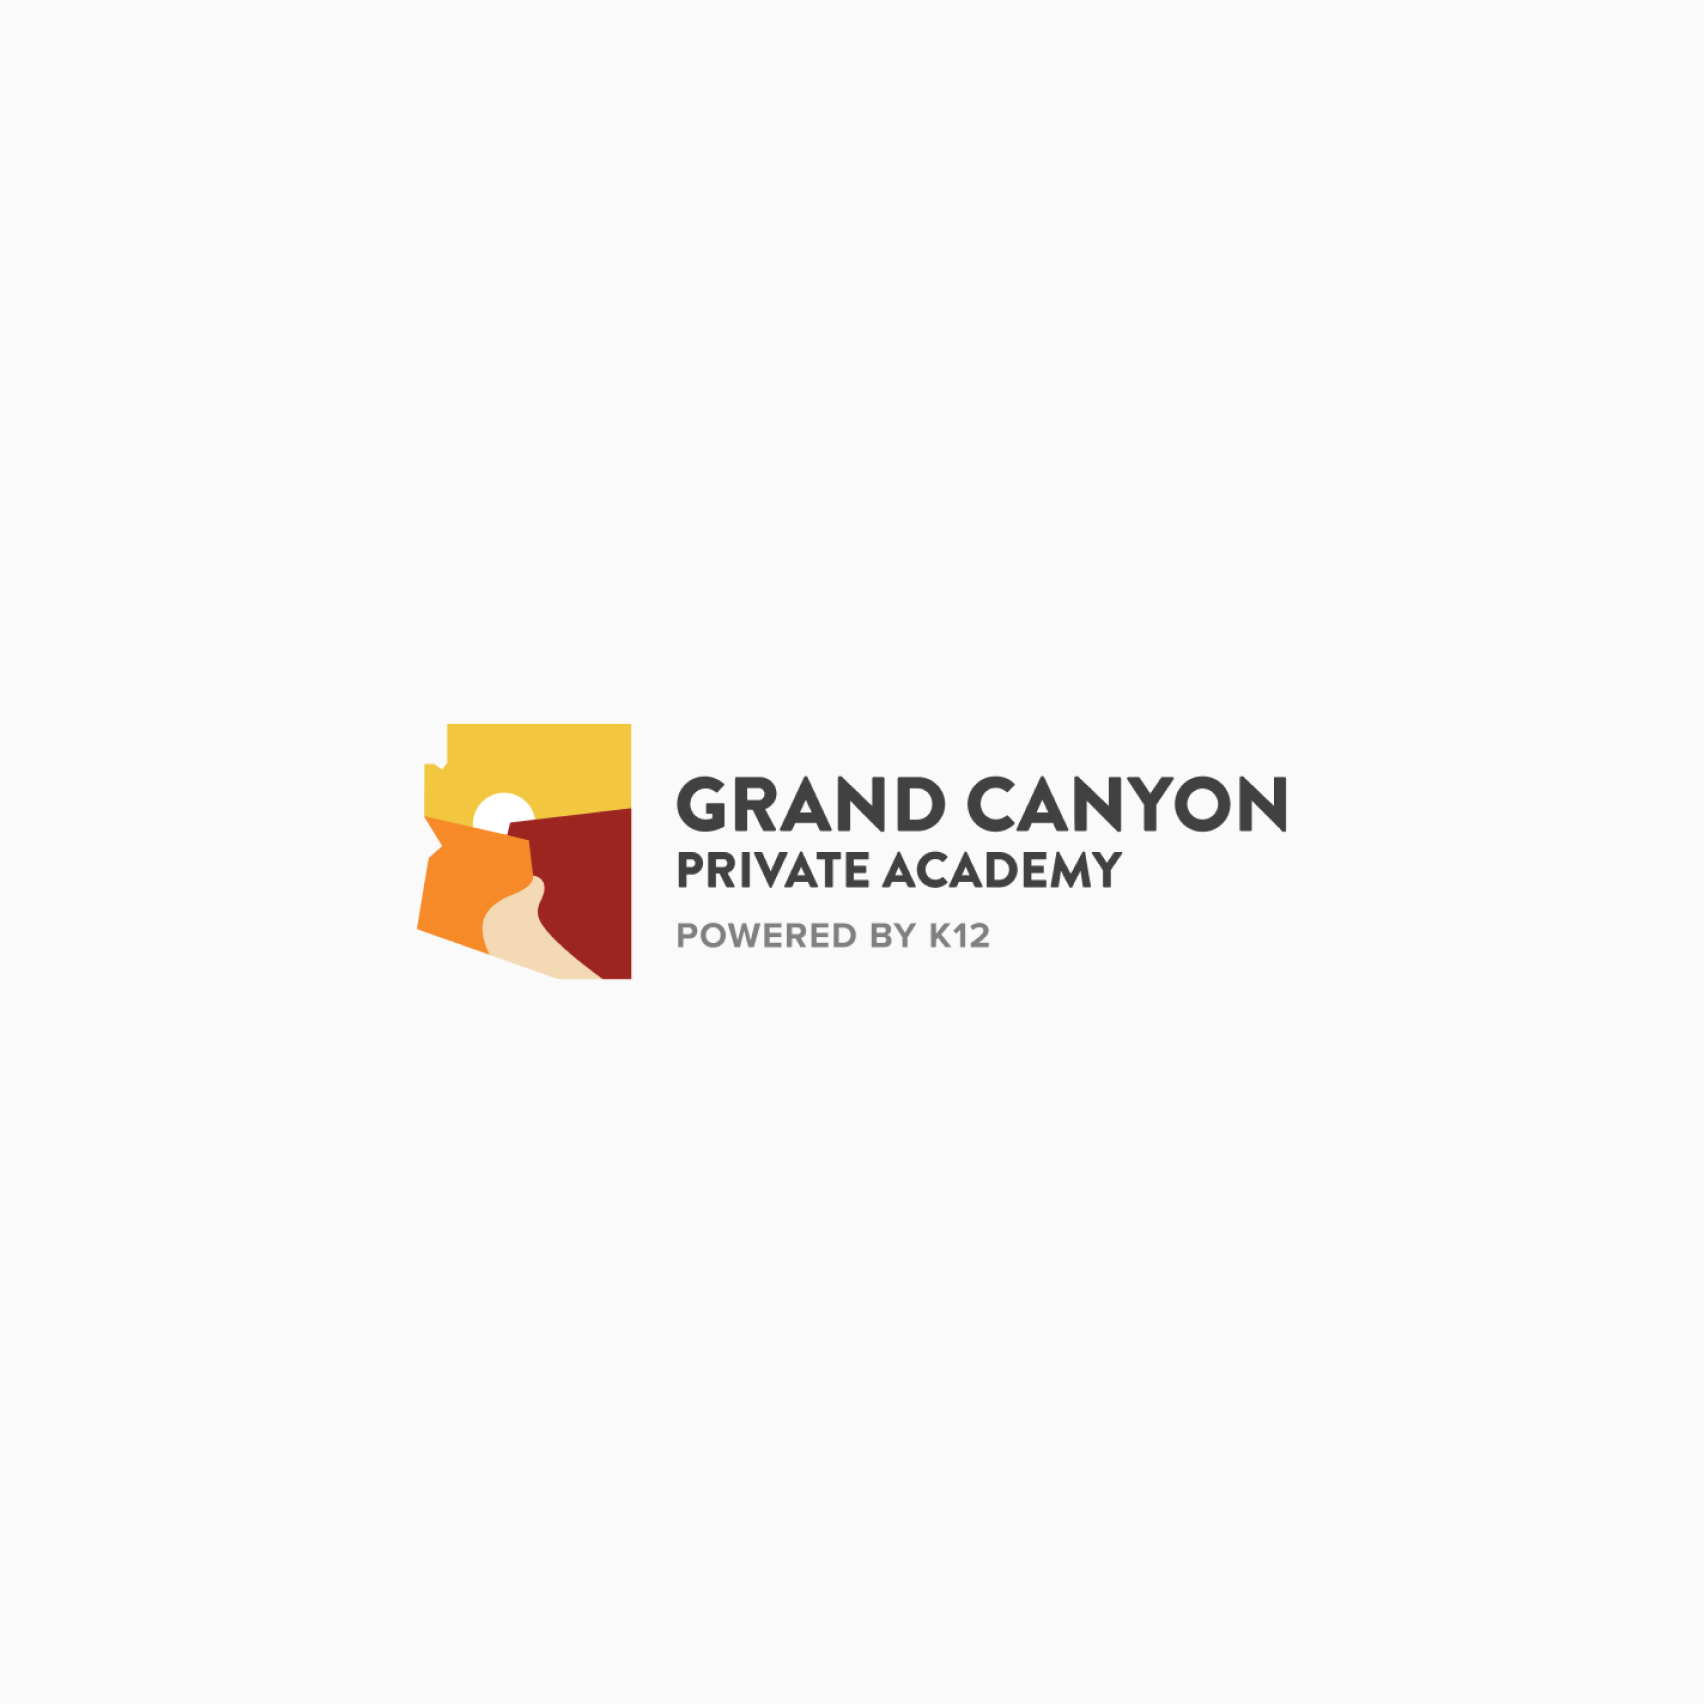 Tuition and Costs image 9 (name Grand Canyon)